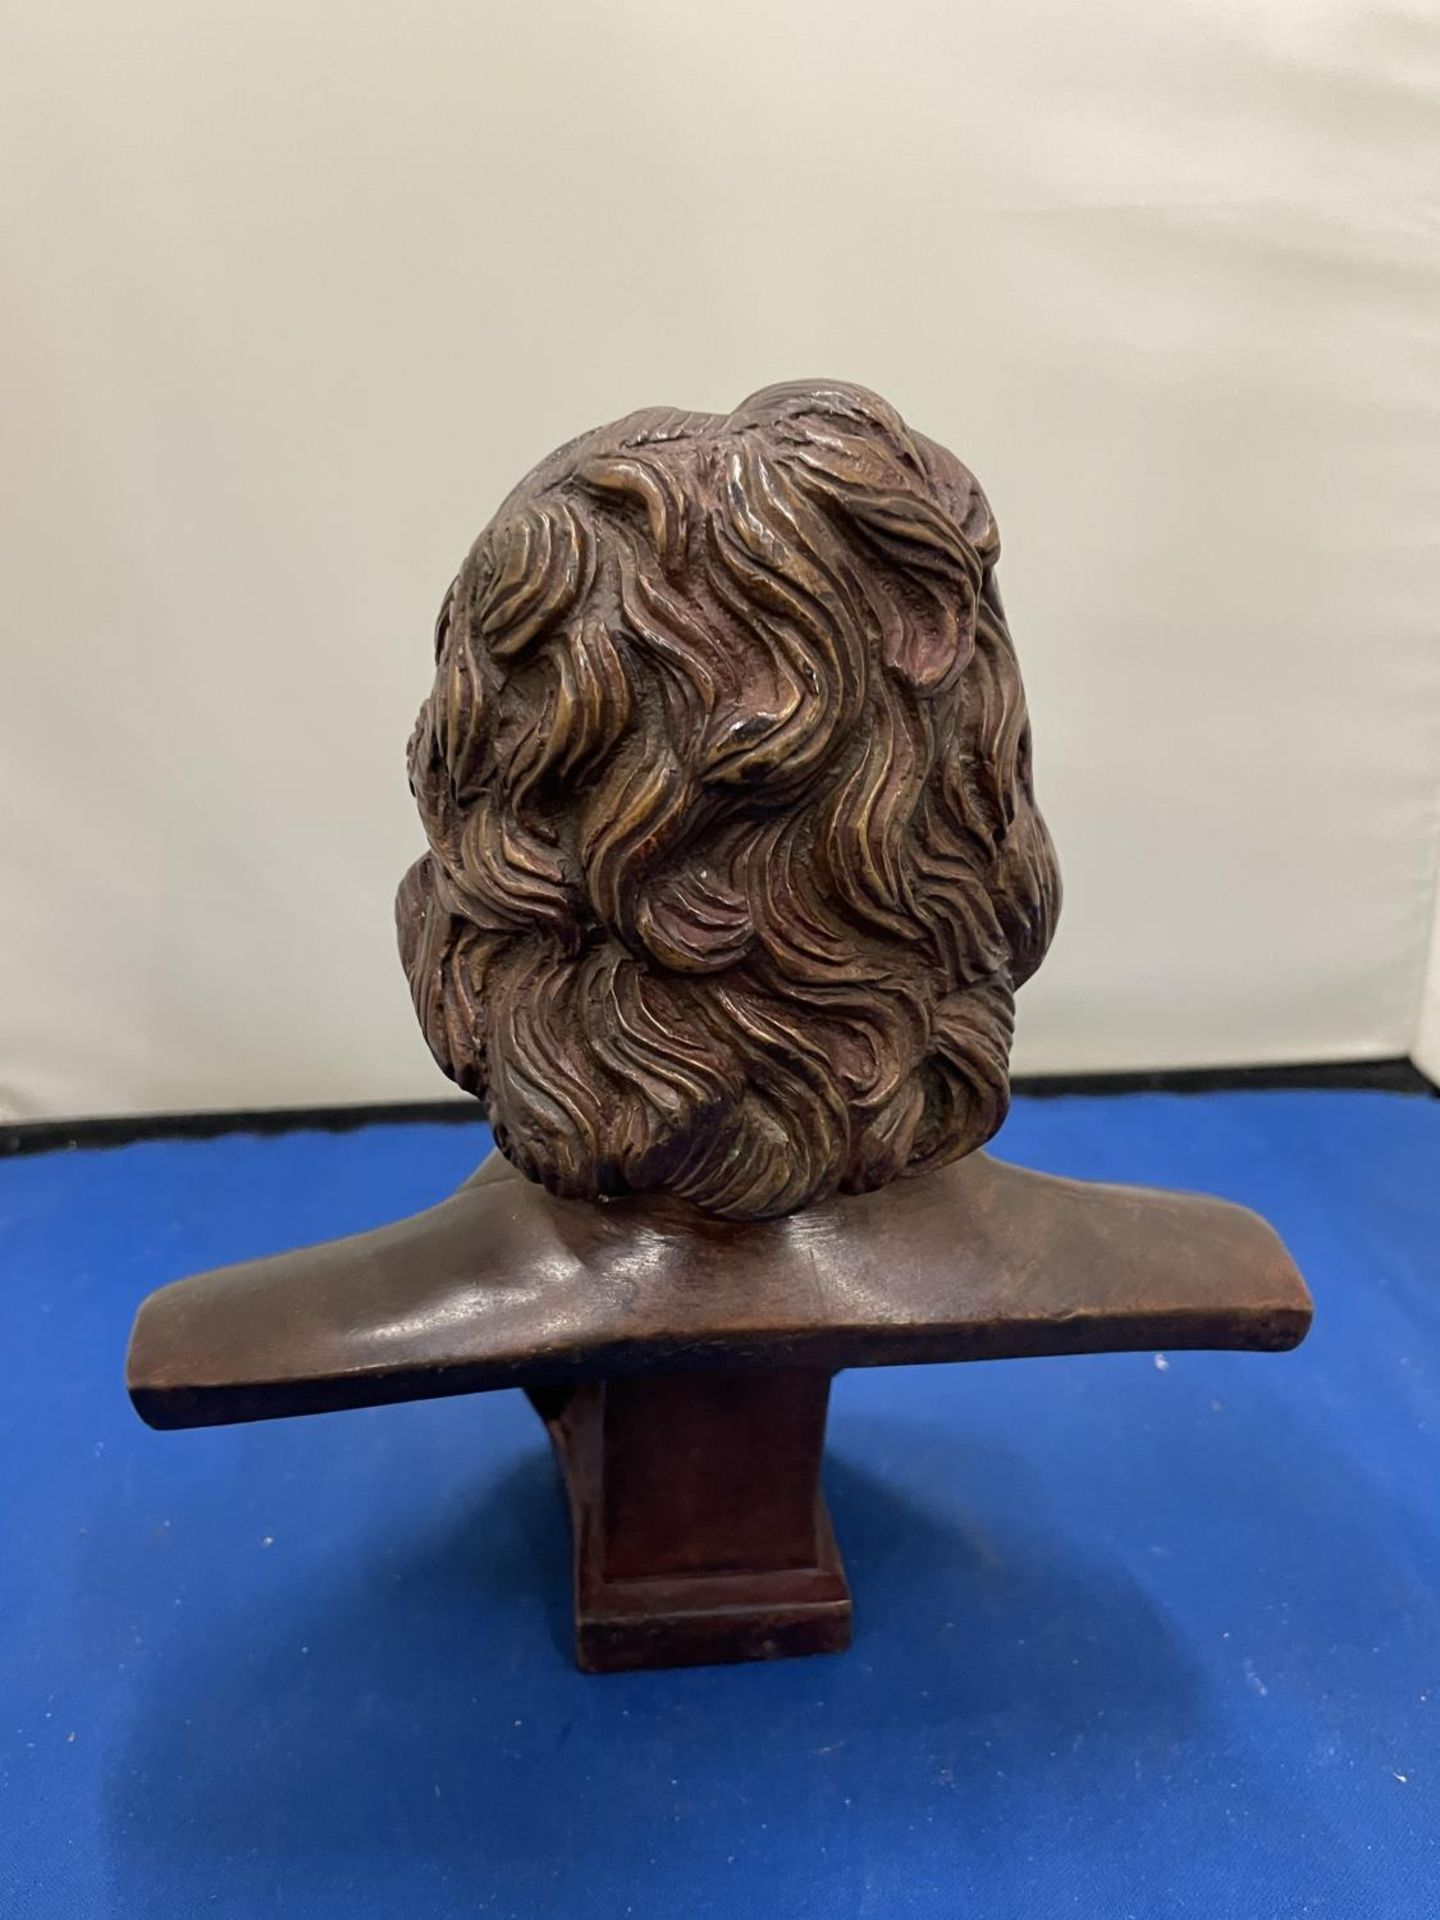 A BRONZE BUST OF BEETHOVEN - Image 5 of 8